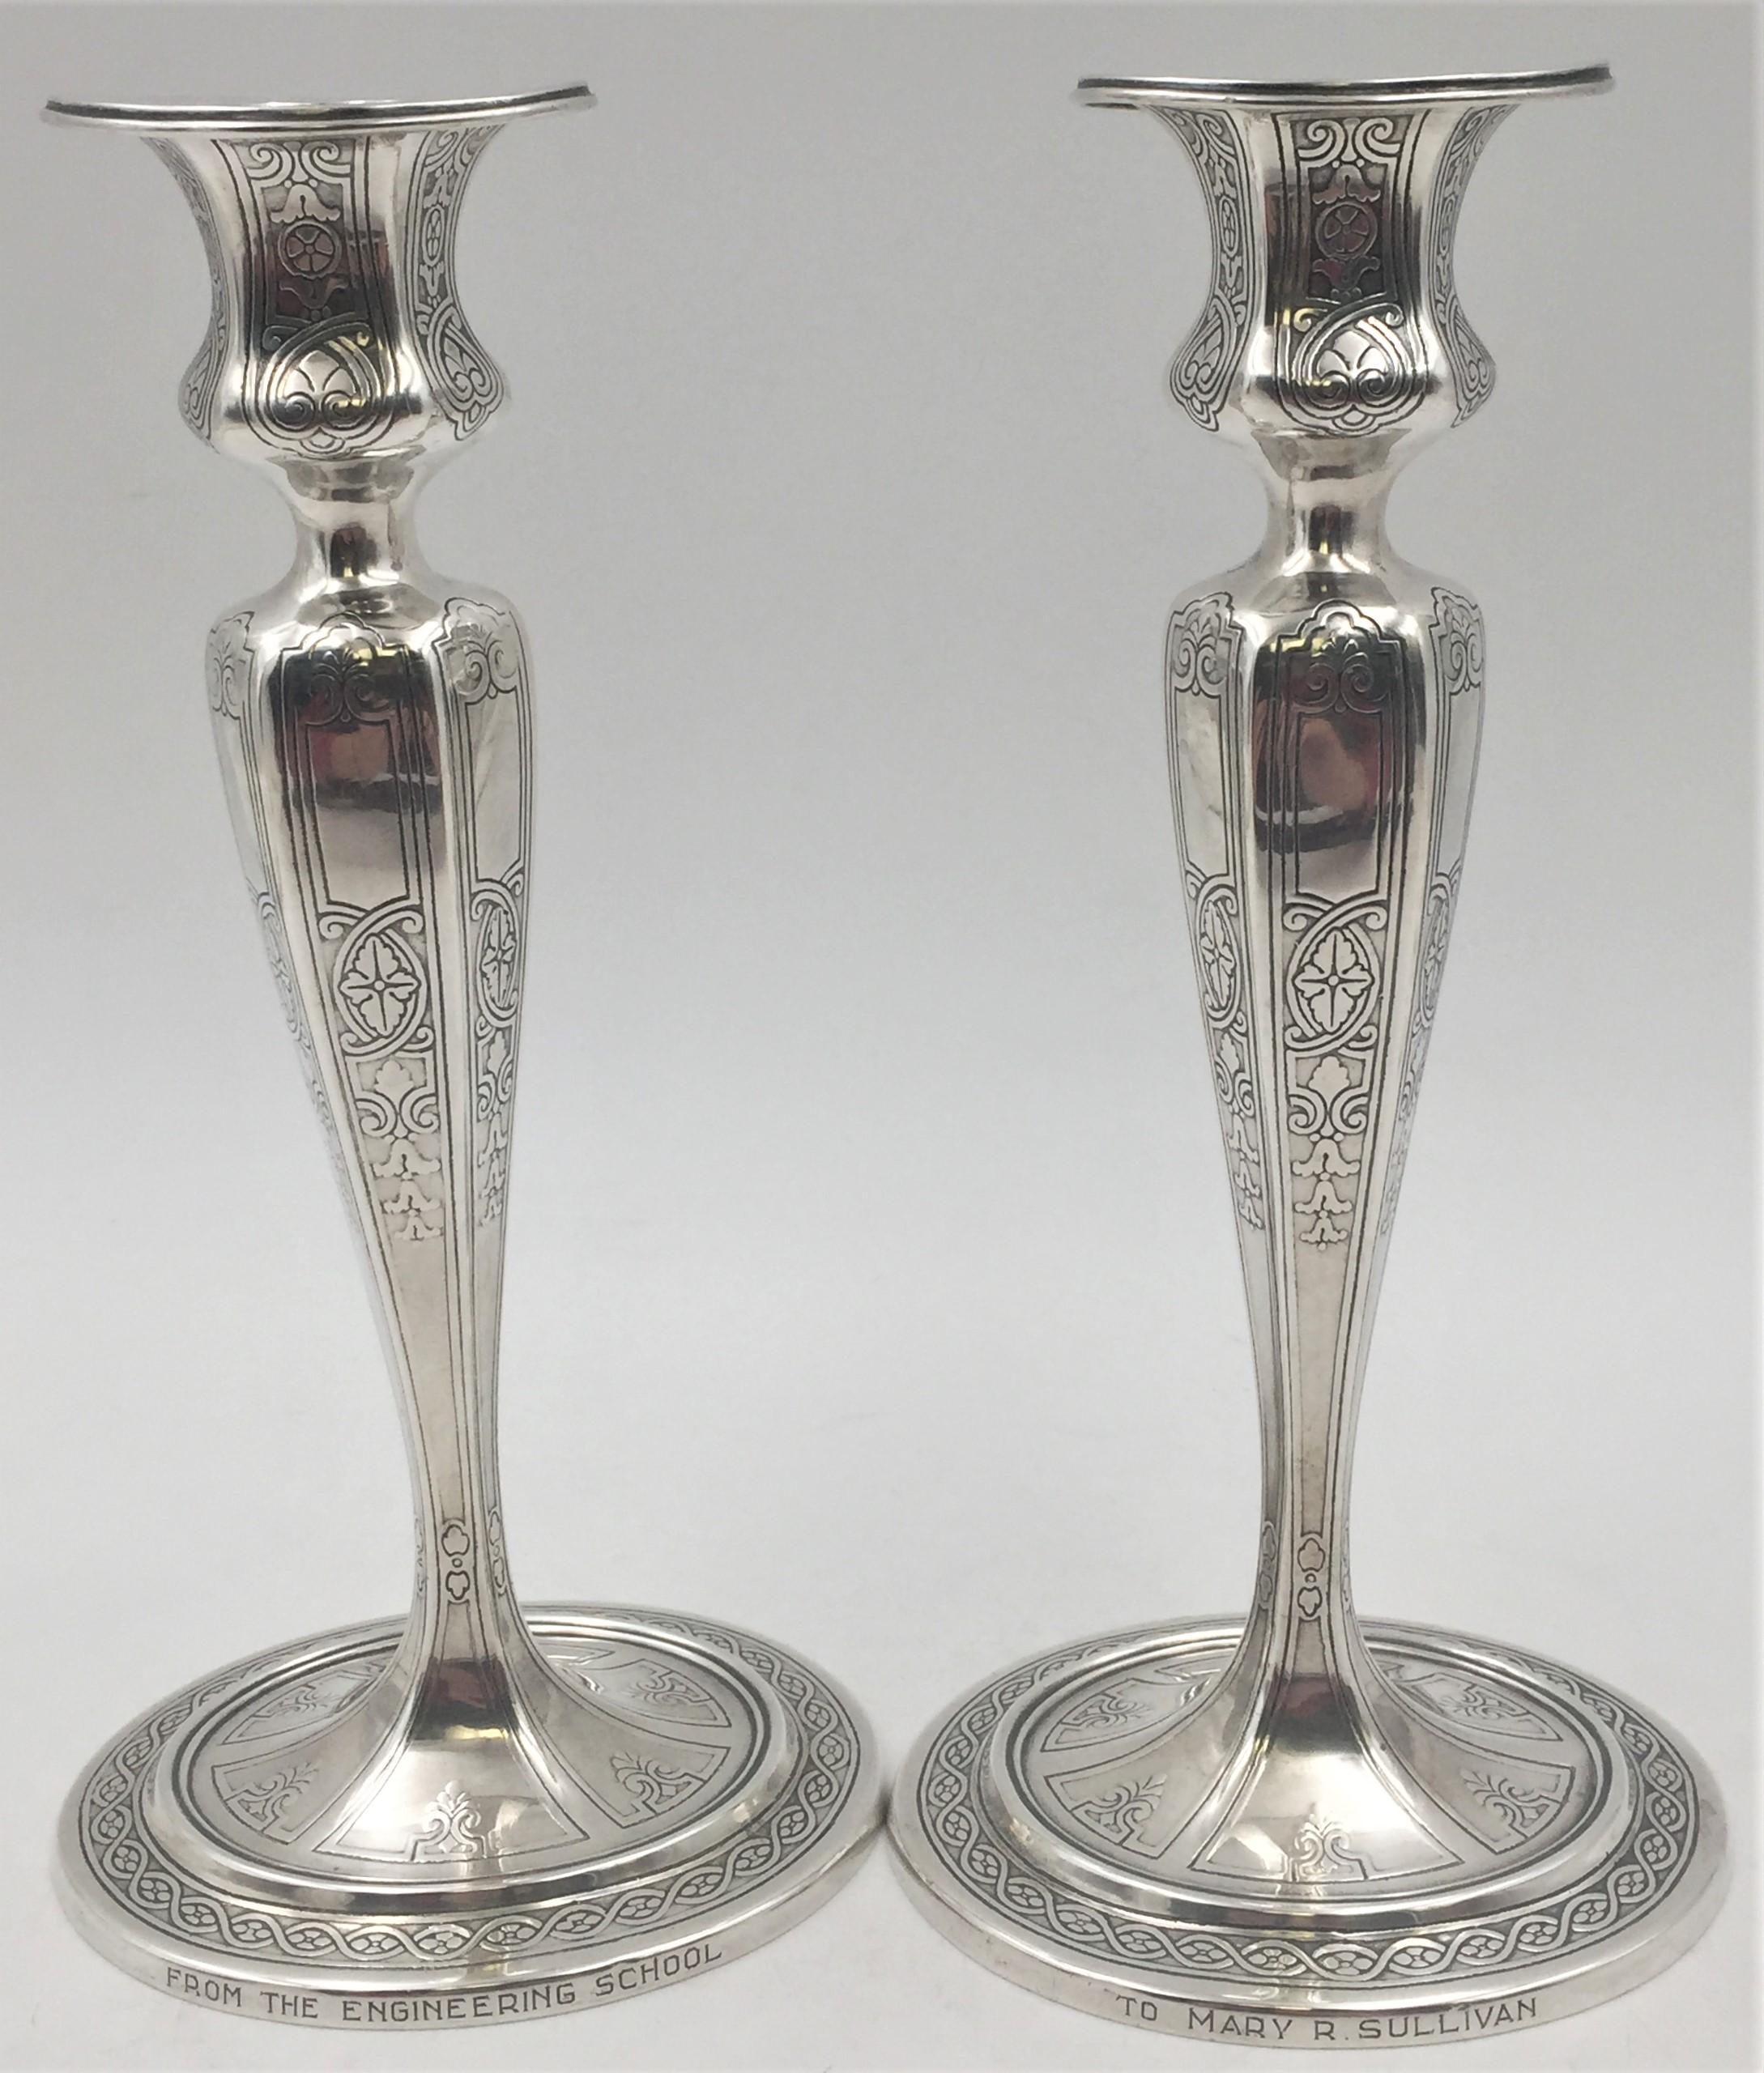 Pair of Tiffany & Co. sterling silver 1910 candlesticks in Art Deco style with engraved floral and stylized geometric motifs from 1910 in pattern number 17659A. Each measures 9 1/2'' in height by 4 1/2'' in base length and bears hallmarks as shown.